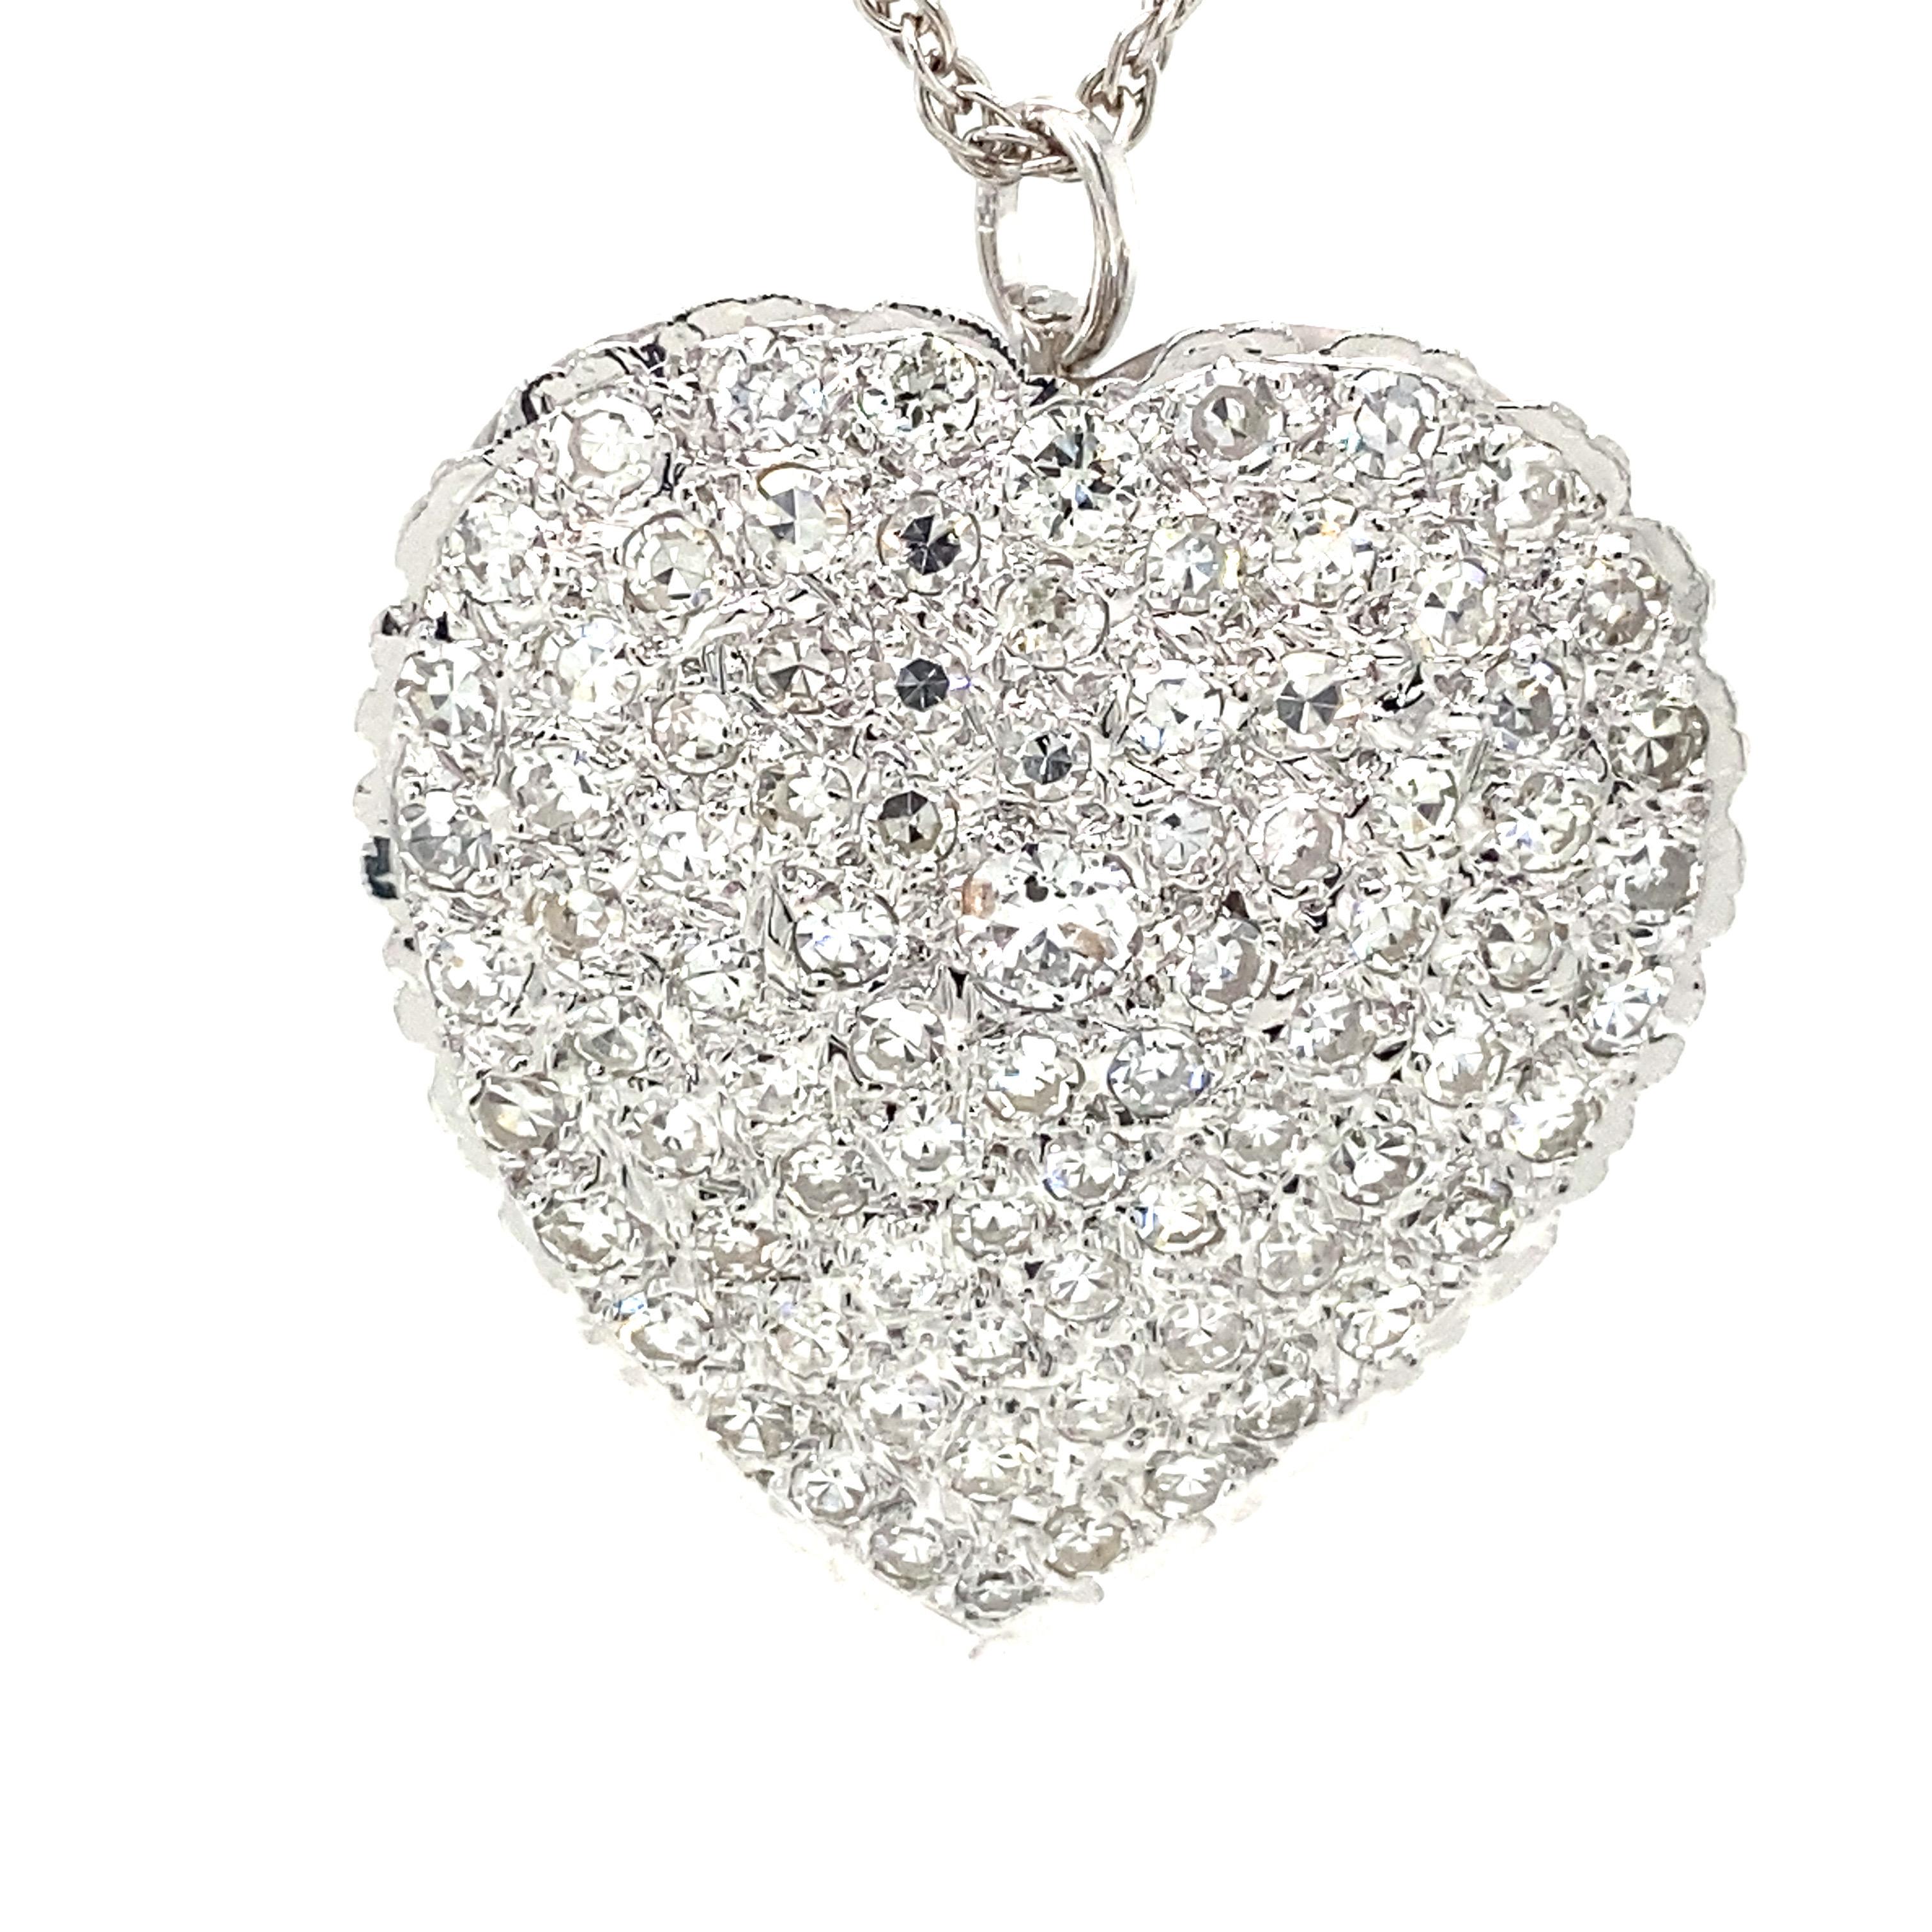 Diamond Heart Shape Pendant Necklace Pin in 14K White Gold.  Round Brilliant Cut Diamonds weighing 2.80 carat total weight, G-I in color and VS-SI in clarity are expertly set.  The Necklace measures 18 inch in length.  The Heart measures 1 1/4 inch